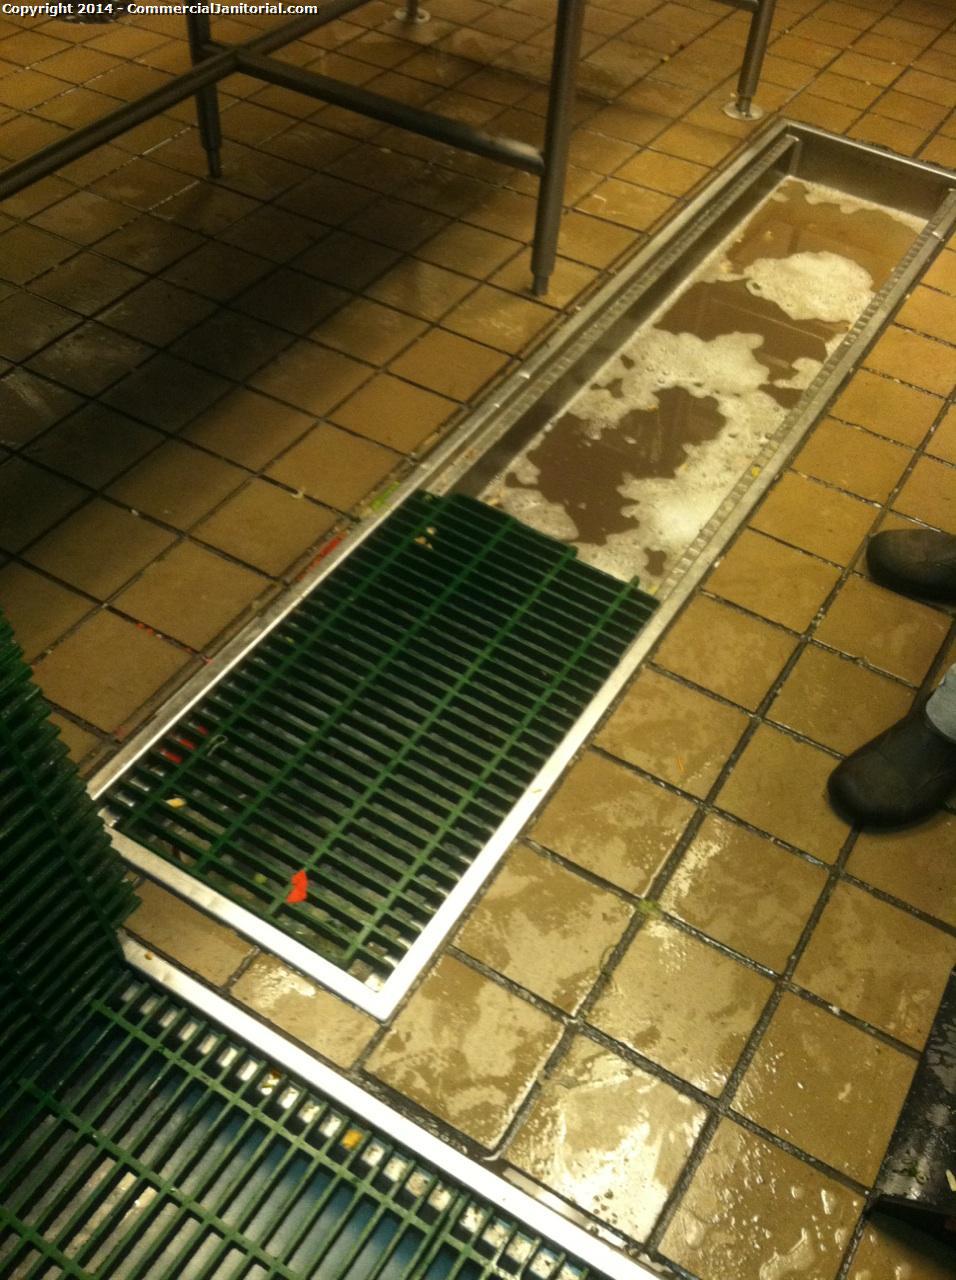    


Hi  


I had the plumbers out this morning to jet both of the drains in the dish room with the green grates that are pictured below. Although the cone screens are in place(at least they are when I come in in the morning and leave at night)the blockage was due to several (10)steak knives, multiple straws and other types of small bits of garbage.With the cones in place these items should not be able to get down the drain, which leads me to believe it is being removed, by who I do not know nor am I placing blame on anyone. 


Needless to say on both of our ends we need to follow up so the blockage does not occur again, as it was a good sized bill to get this done. 


Thanks 

Kody 
